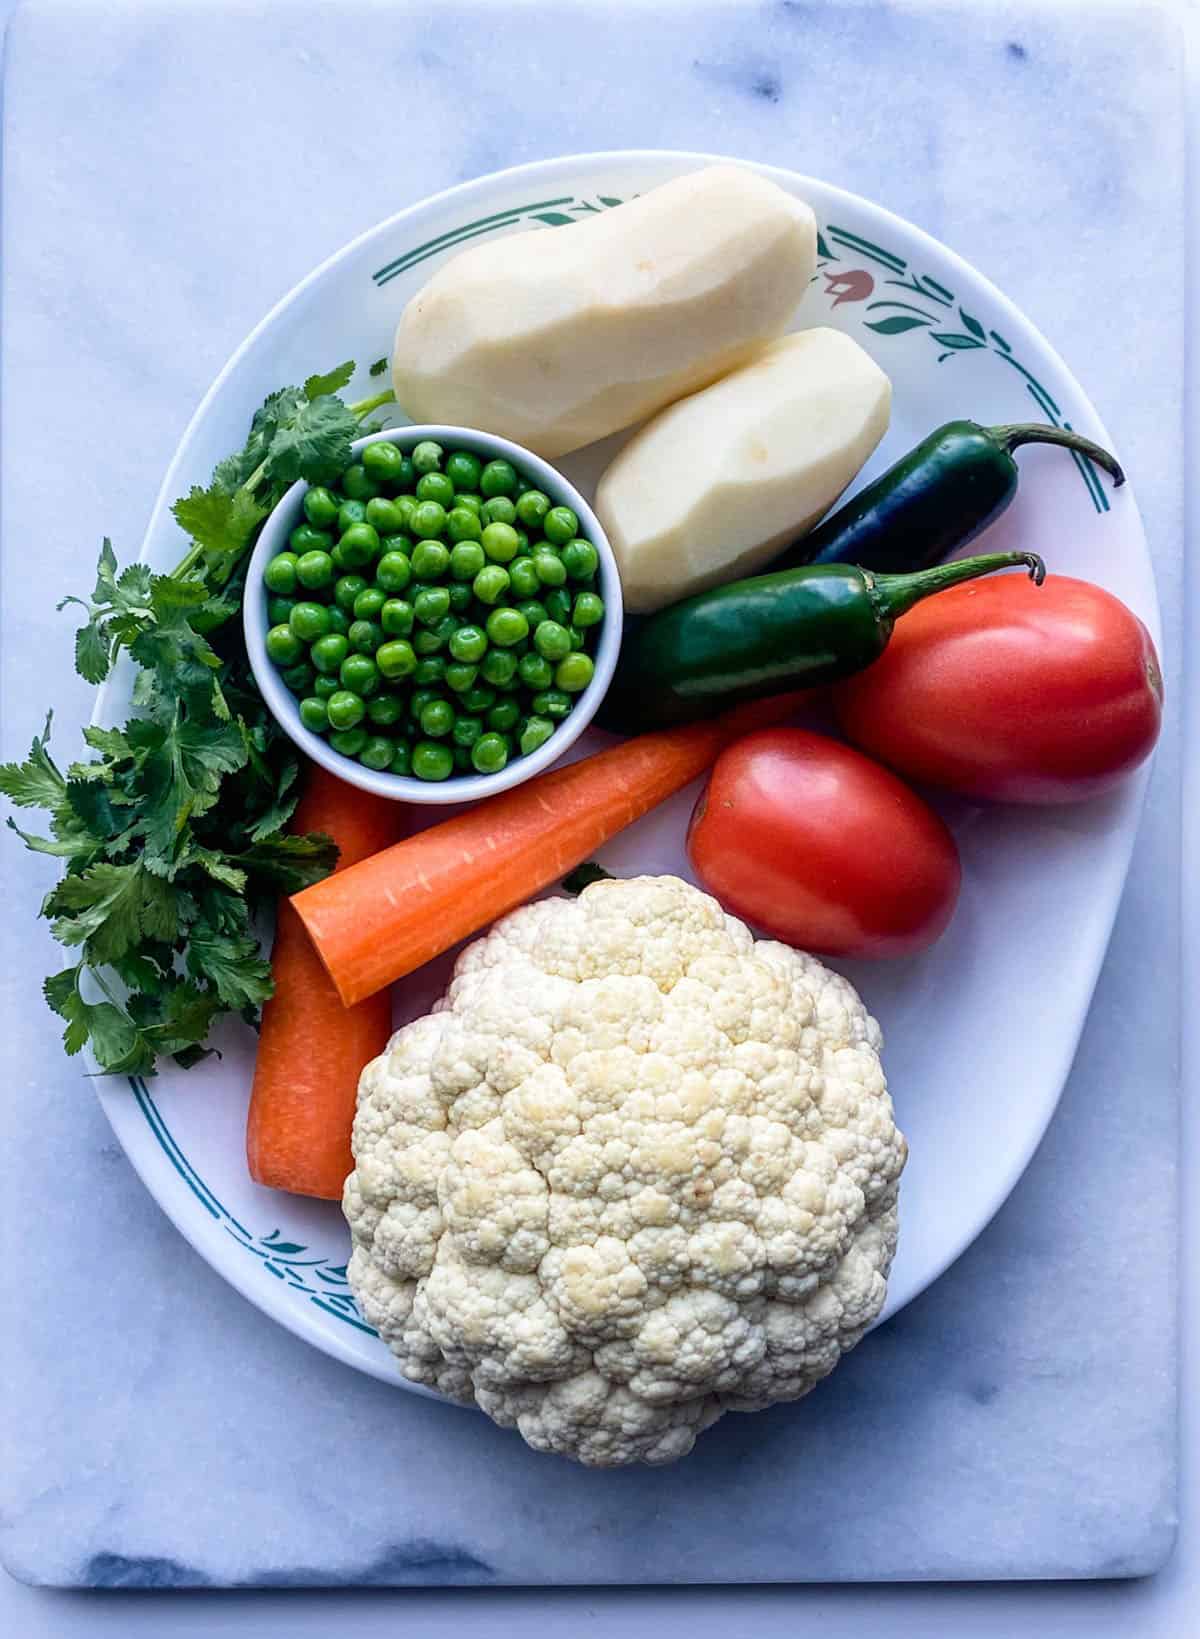 Cauliflower, peas, potatoes and other vegetables  for Indian recipe on a white platter